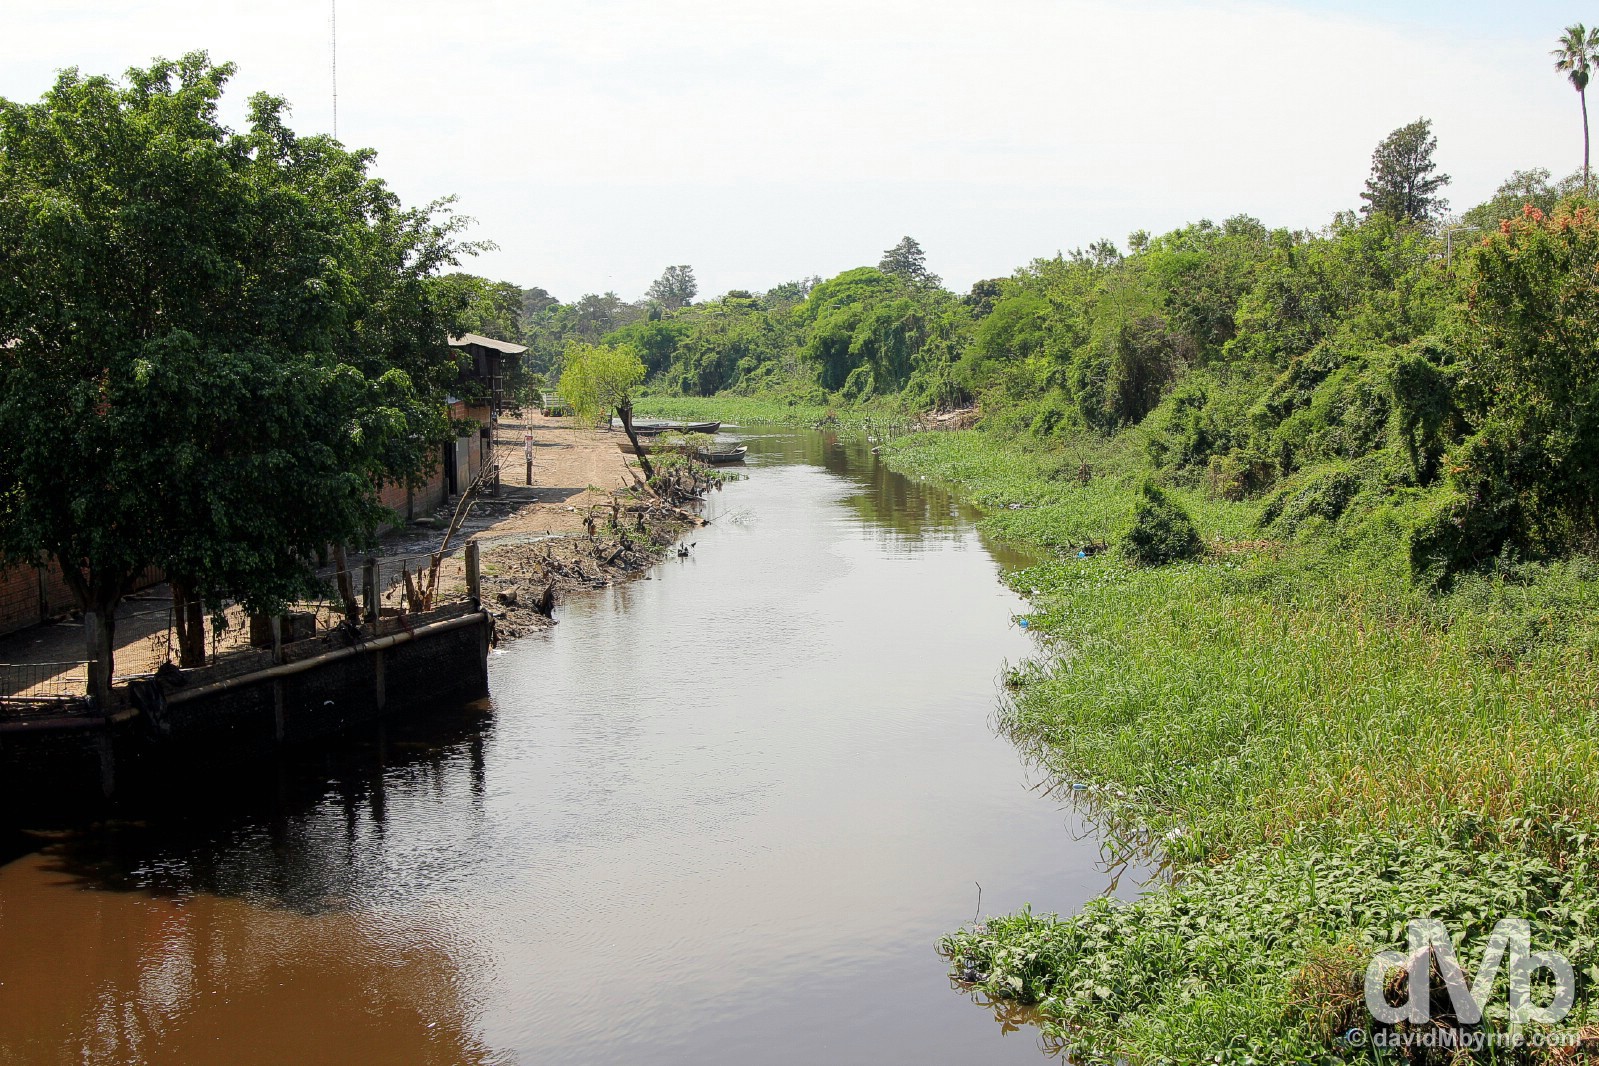 A stream/river marking the Argentina (right) - Paraguay (left) border crossing outside the Argentine town of Clorinda, northeast Argentina. September 8, 2015.